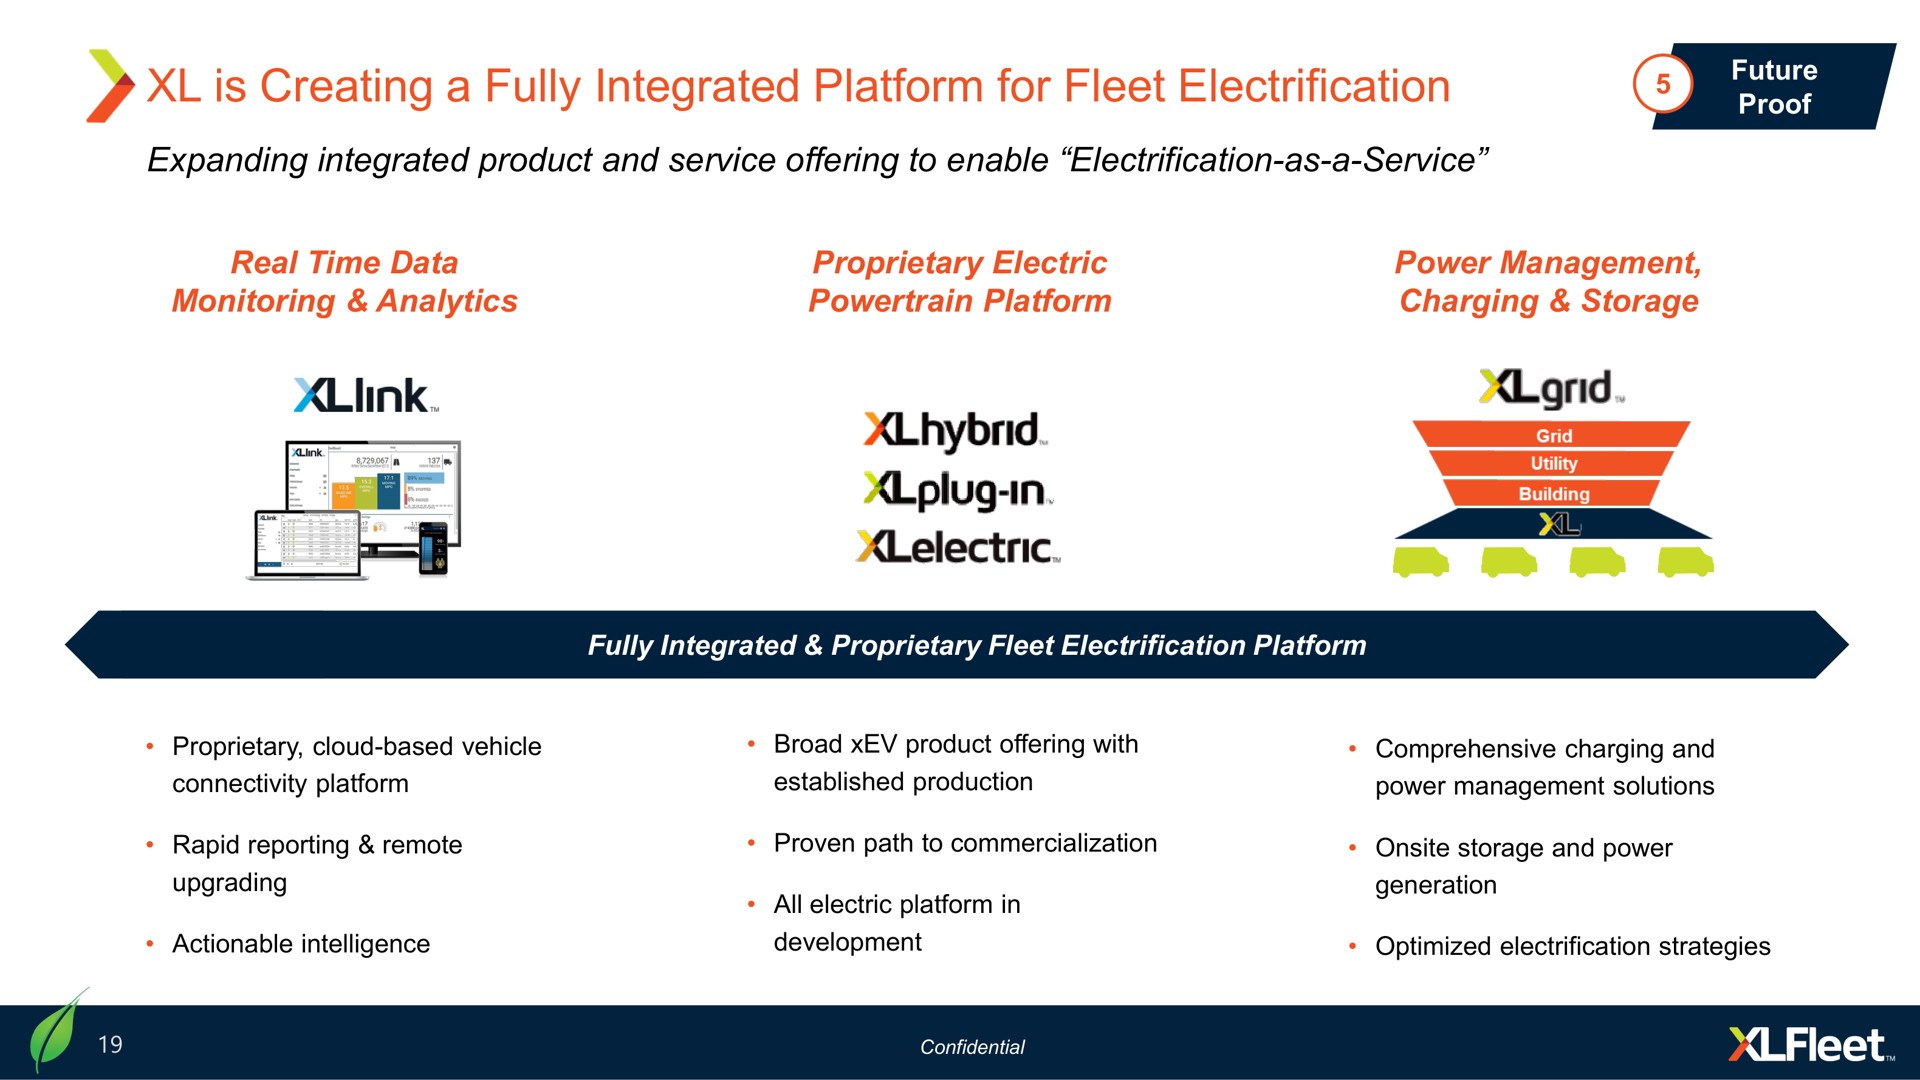 is creating a fully integrated platform for fleet electrification lis ana in | XL Fleet